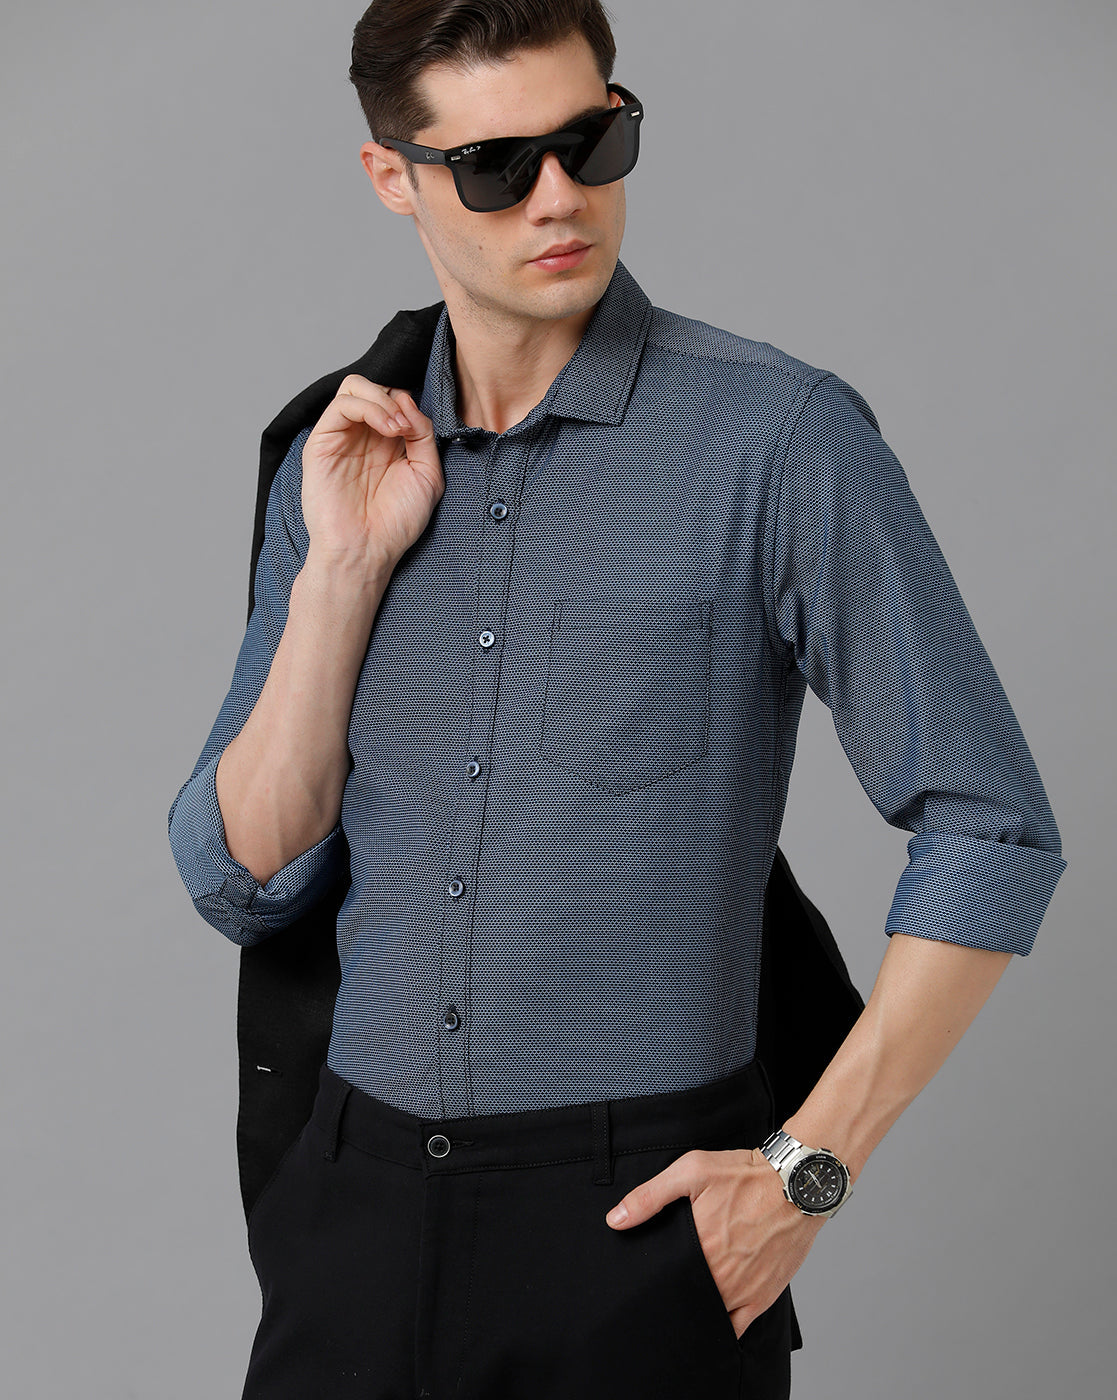 Luxury party wear shirts